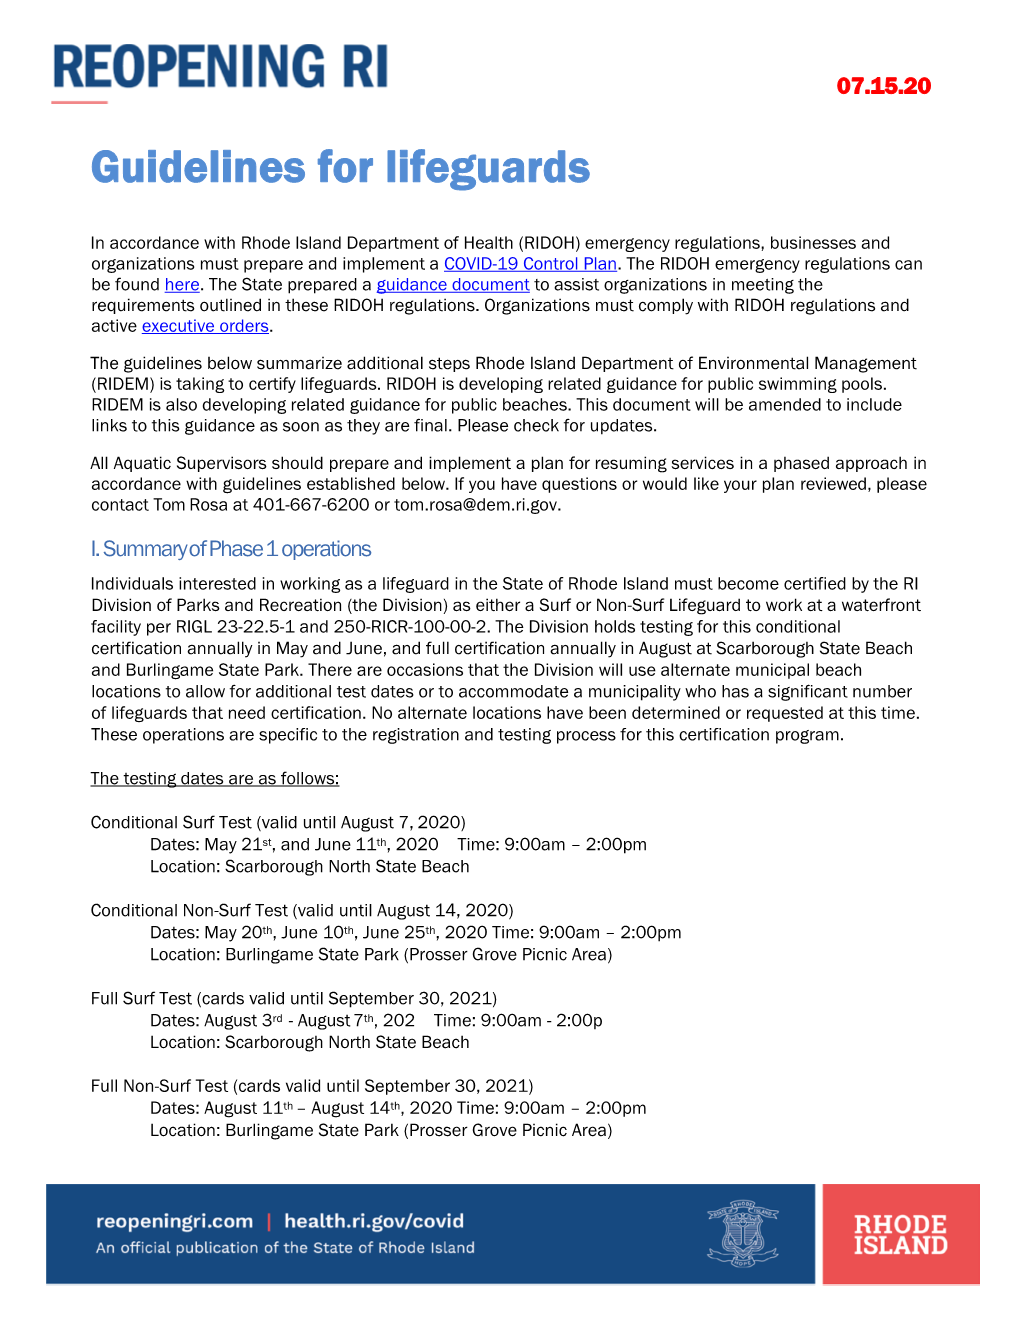 Guidelines for Lifeguards